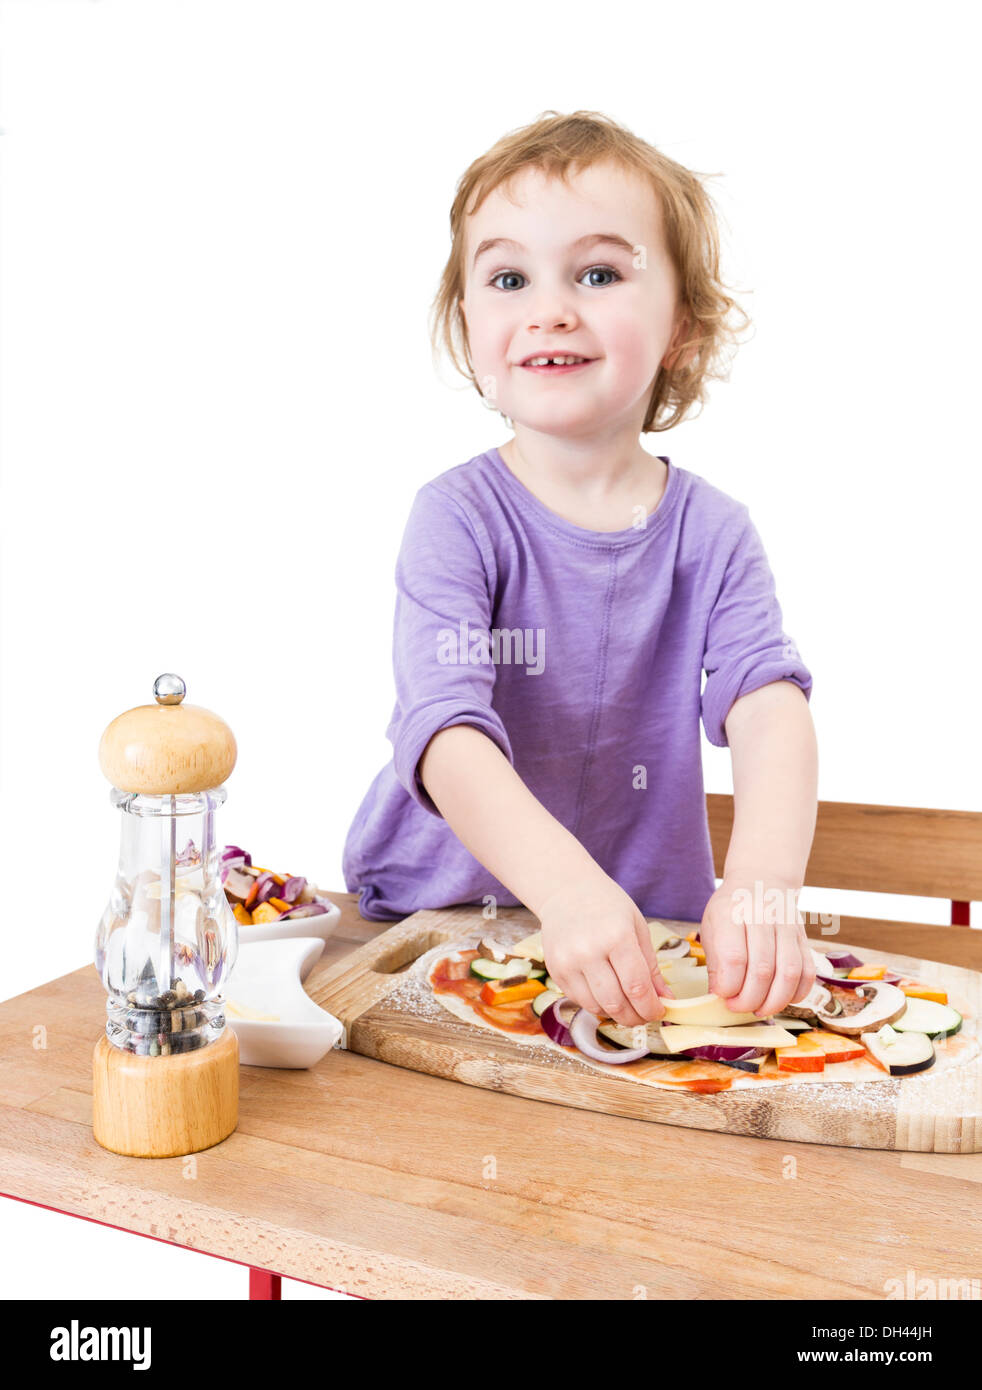 cute girl making pizza with a smile. isolated on white background Stock Photo